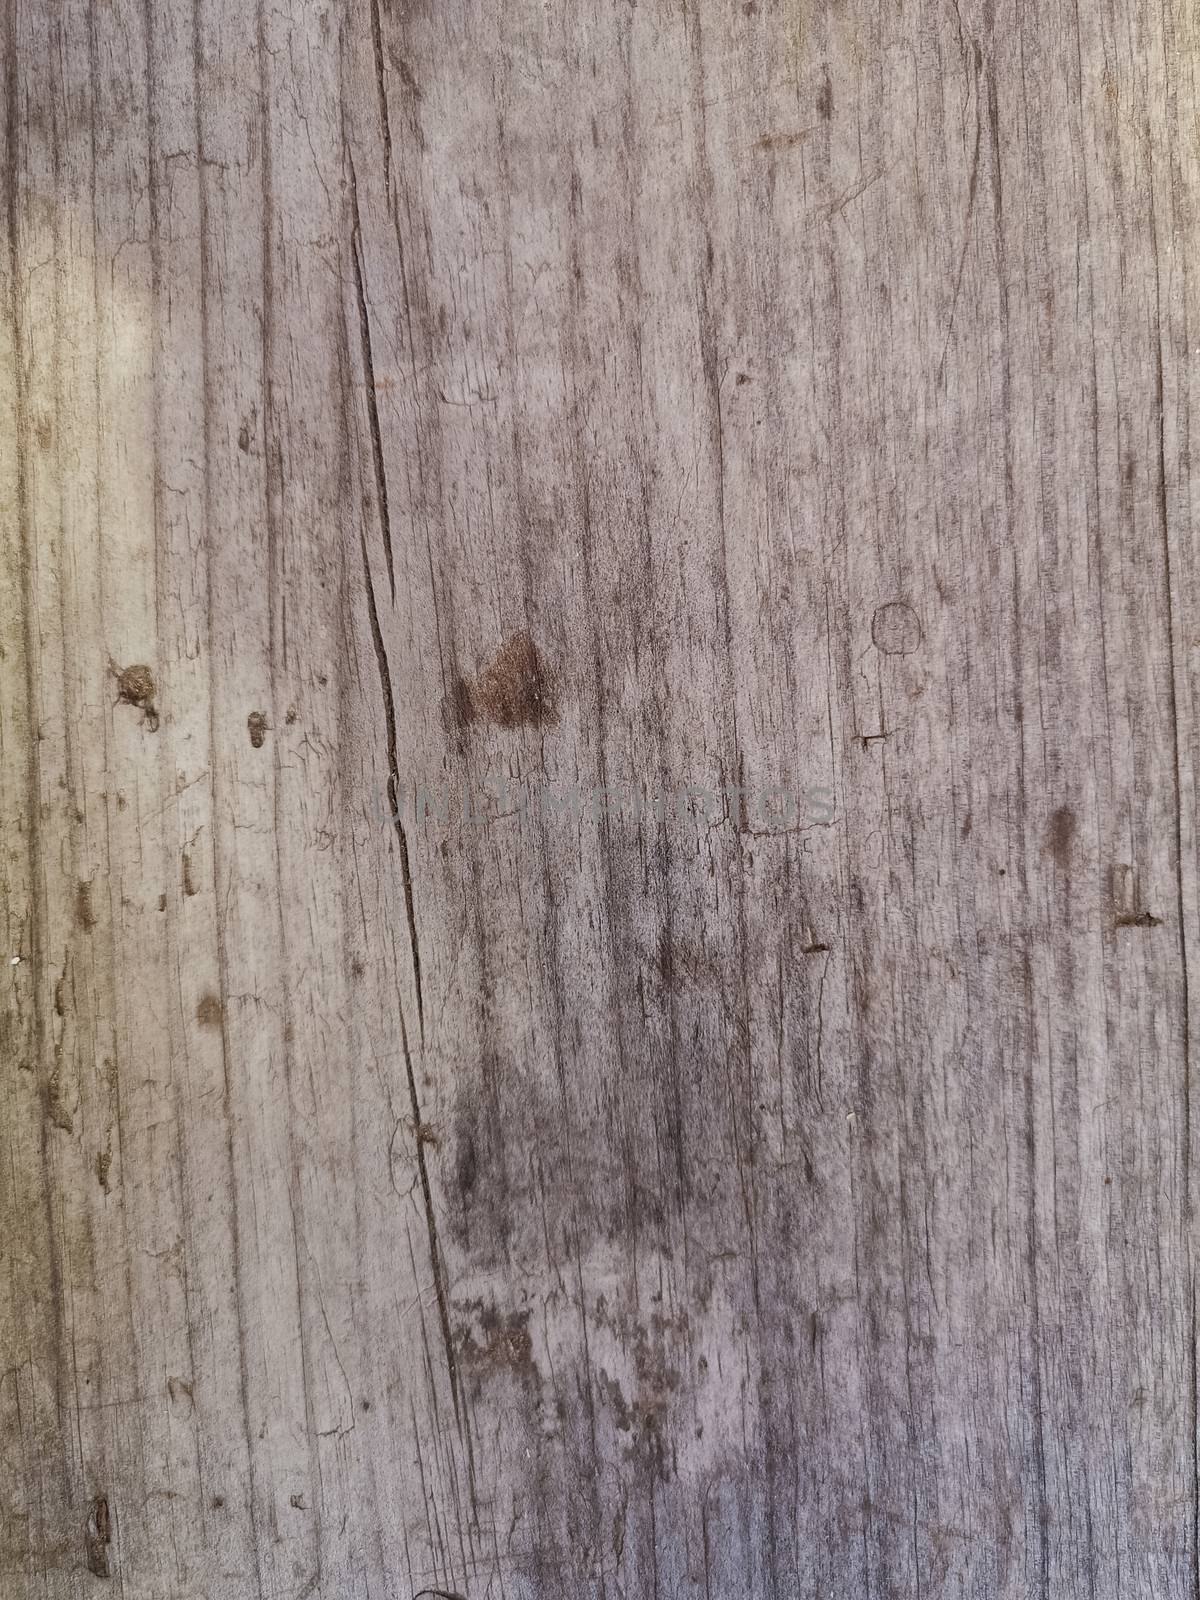 Brown painted wood texture background wood texture with natural pattern old wood texture background